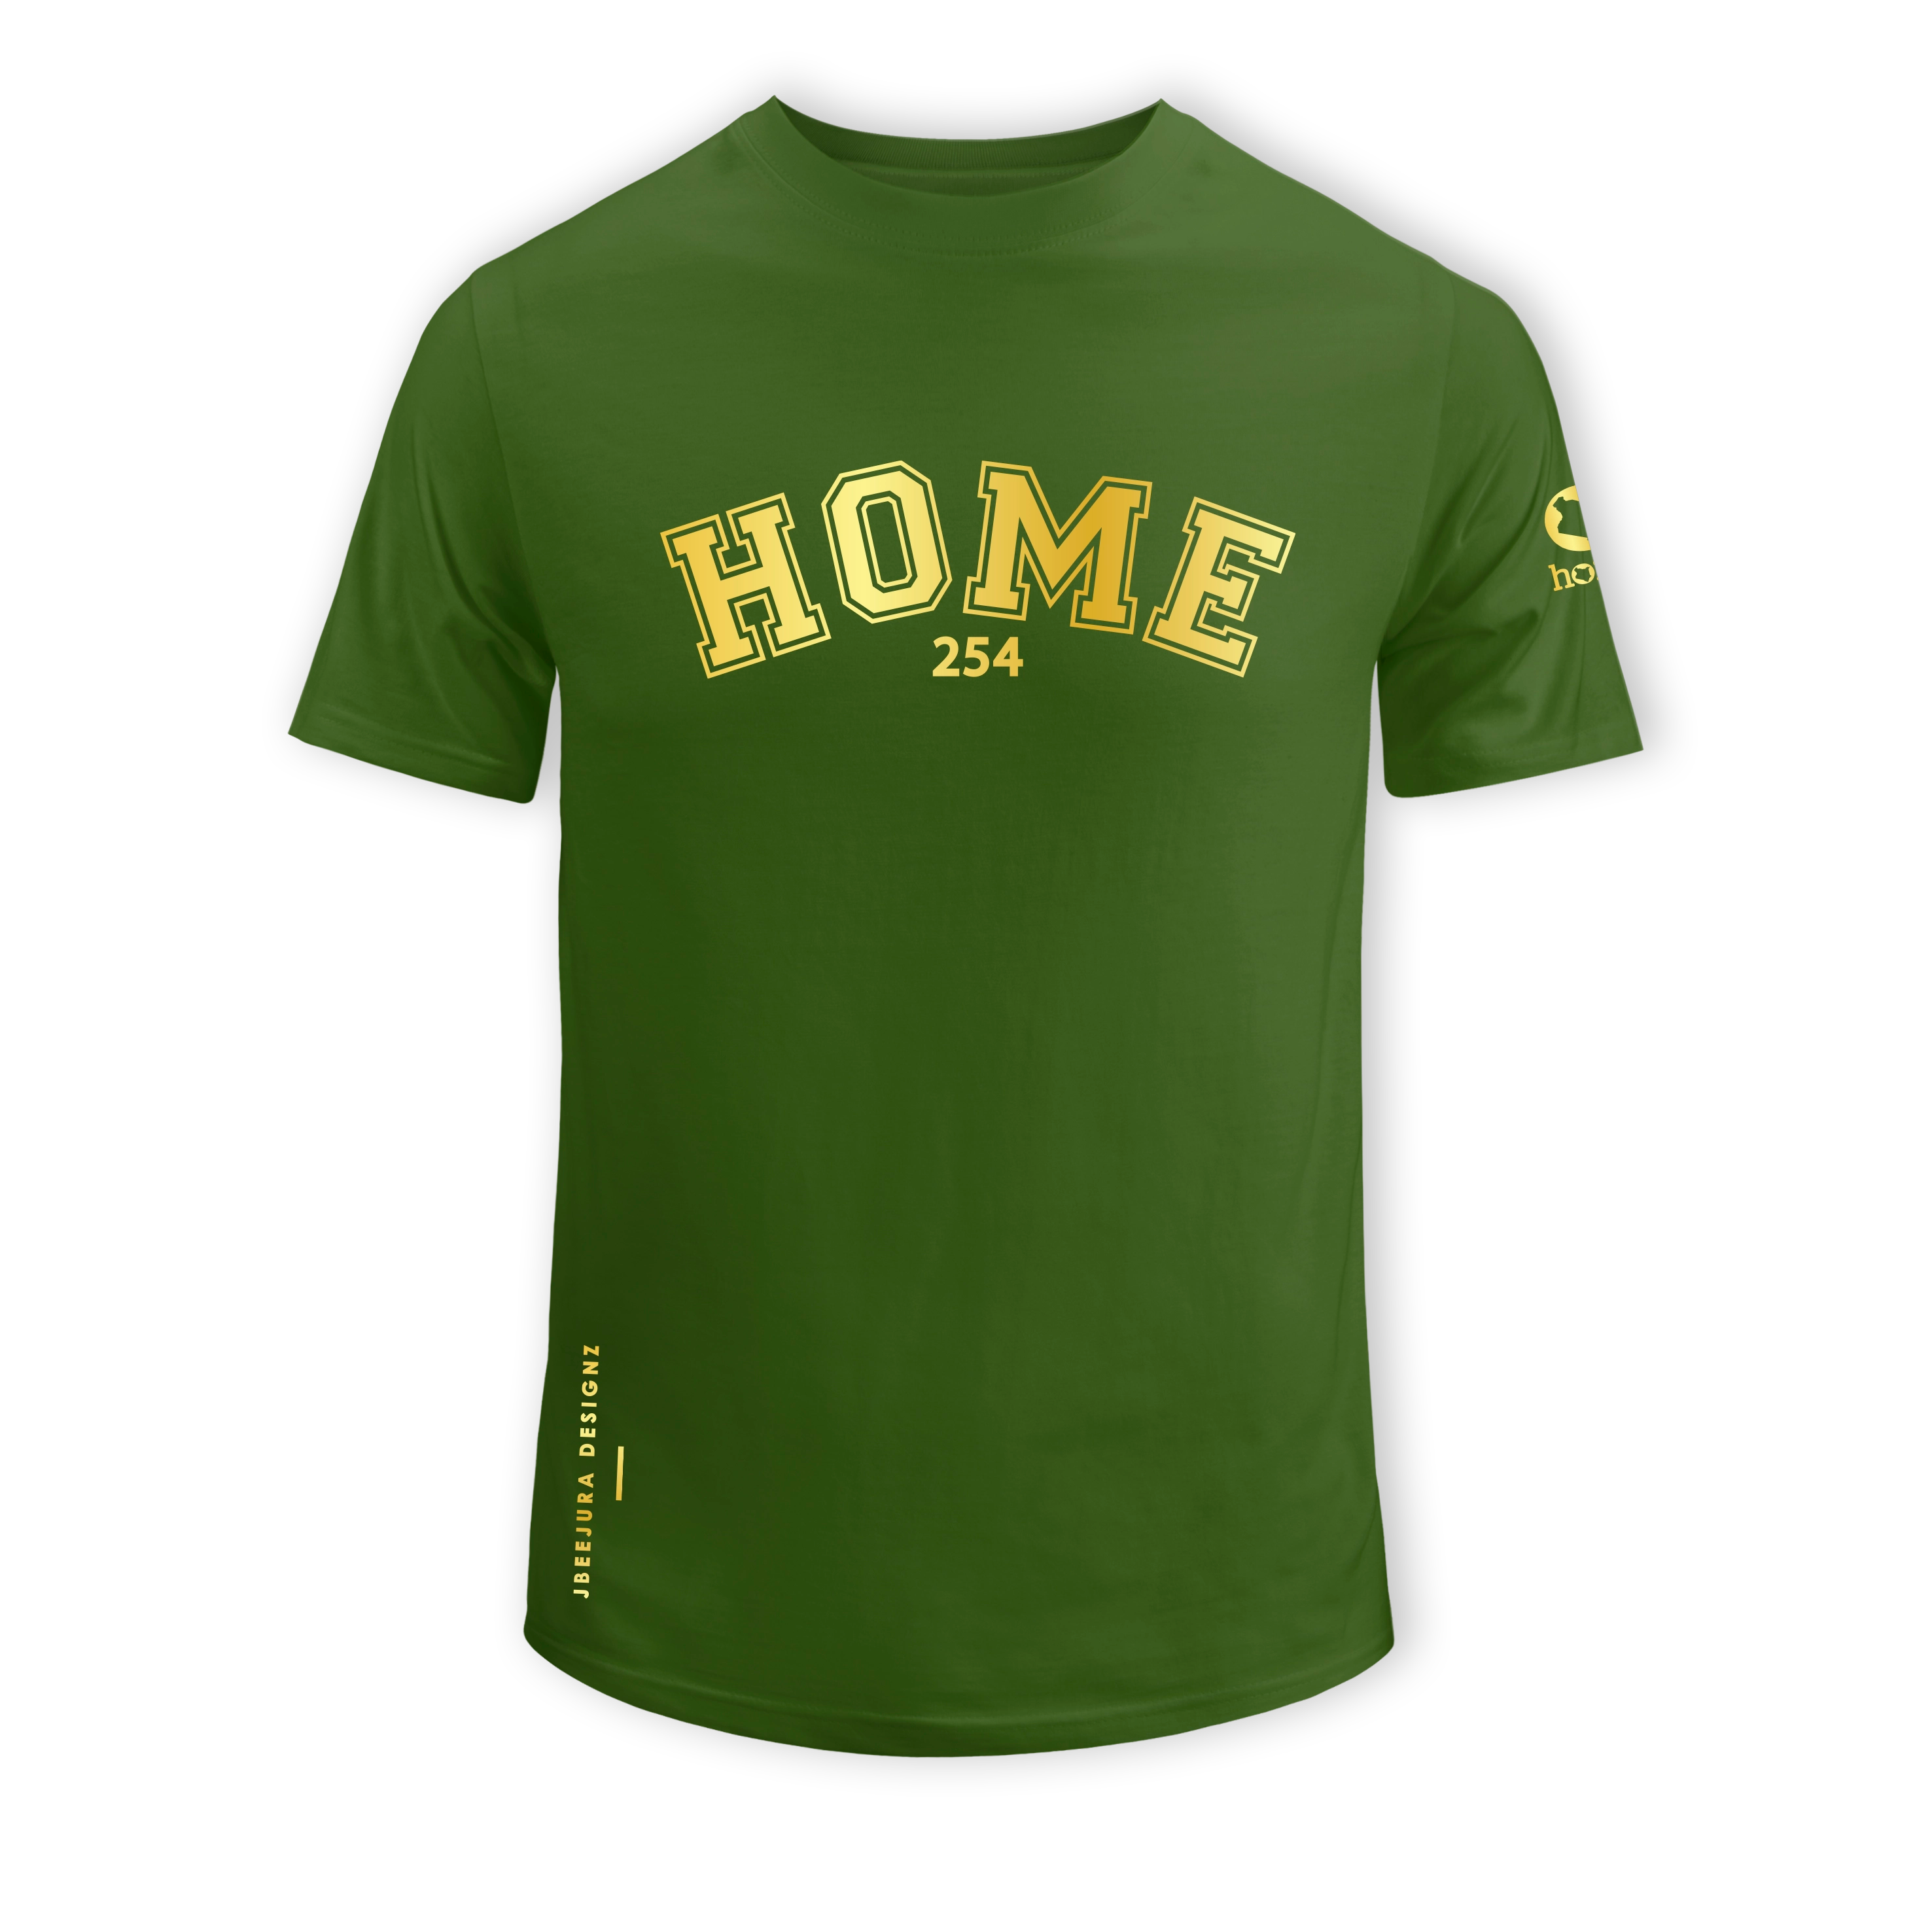  home_254 SHORT-SLEEVED JUNGLE GREEN T-SHIRT WITH A GOLD COLLEGE PRINT – COTTON PLUS FABRIC